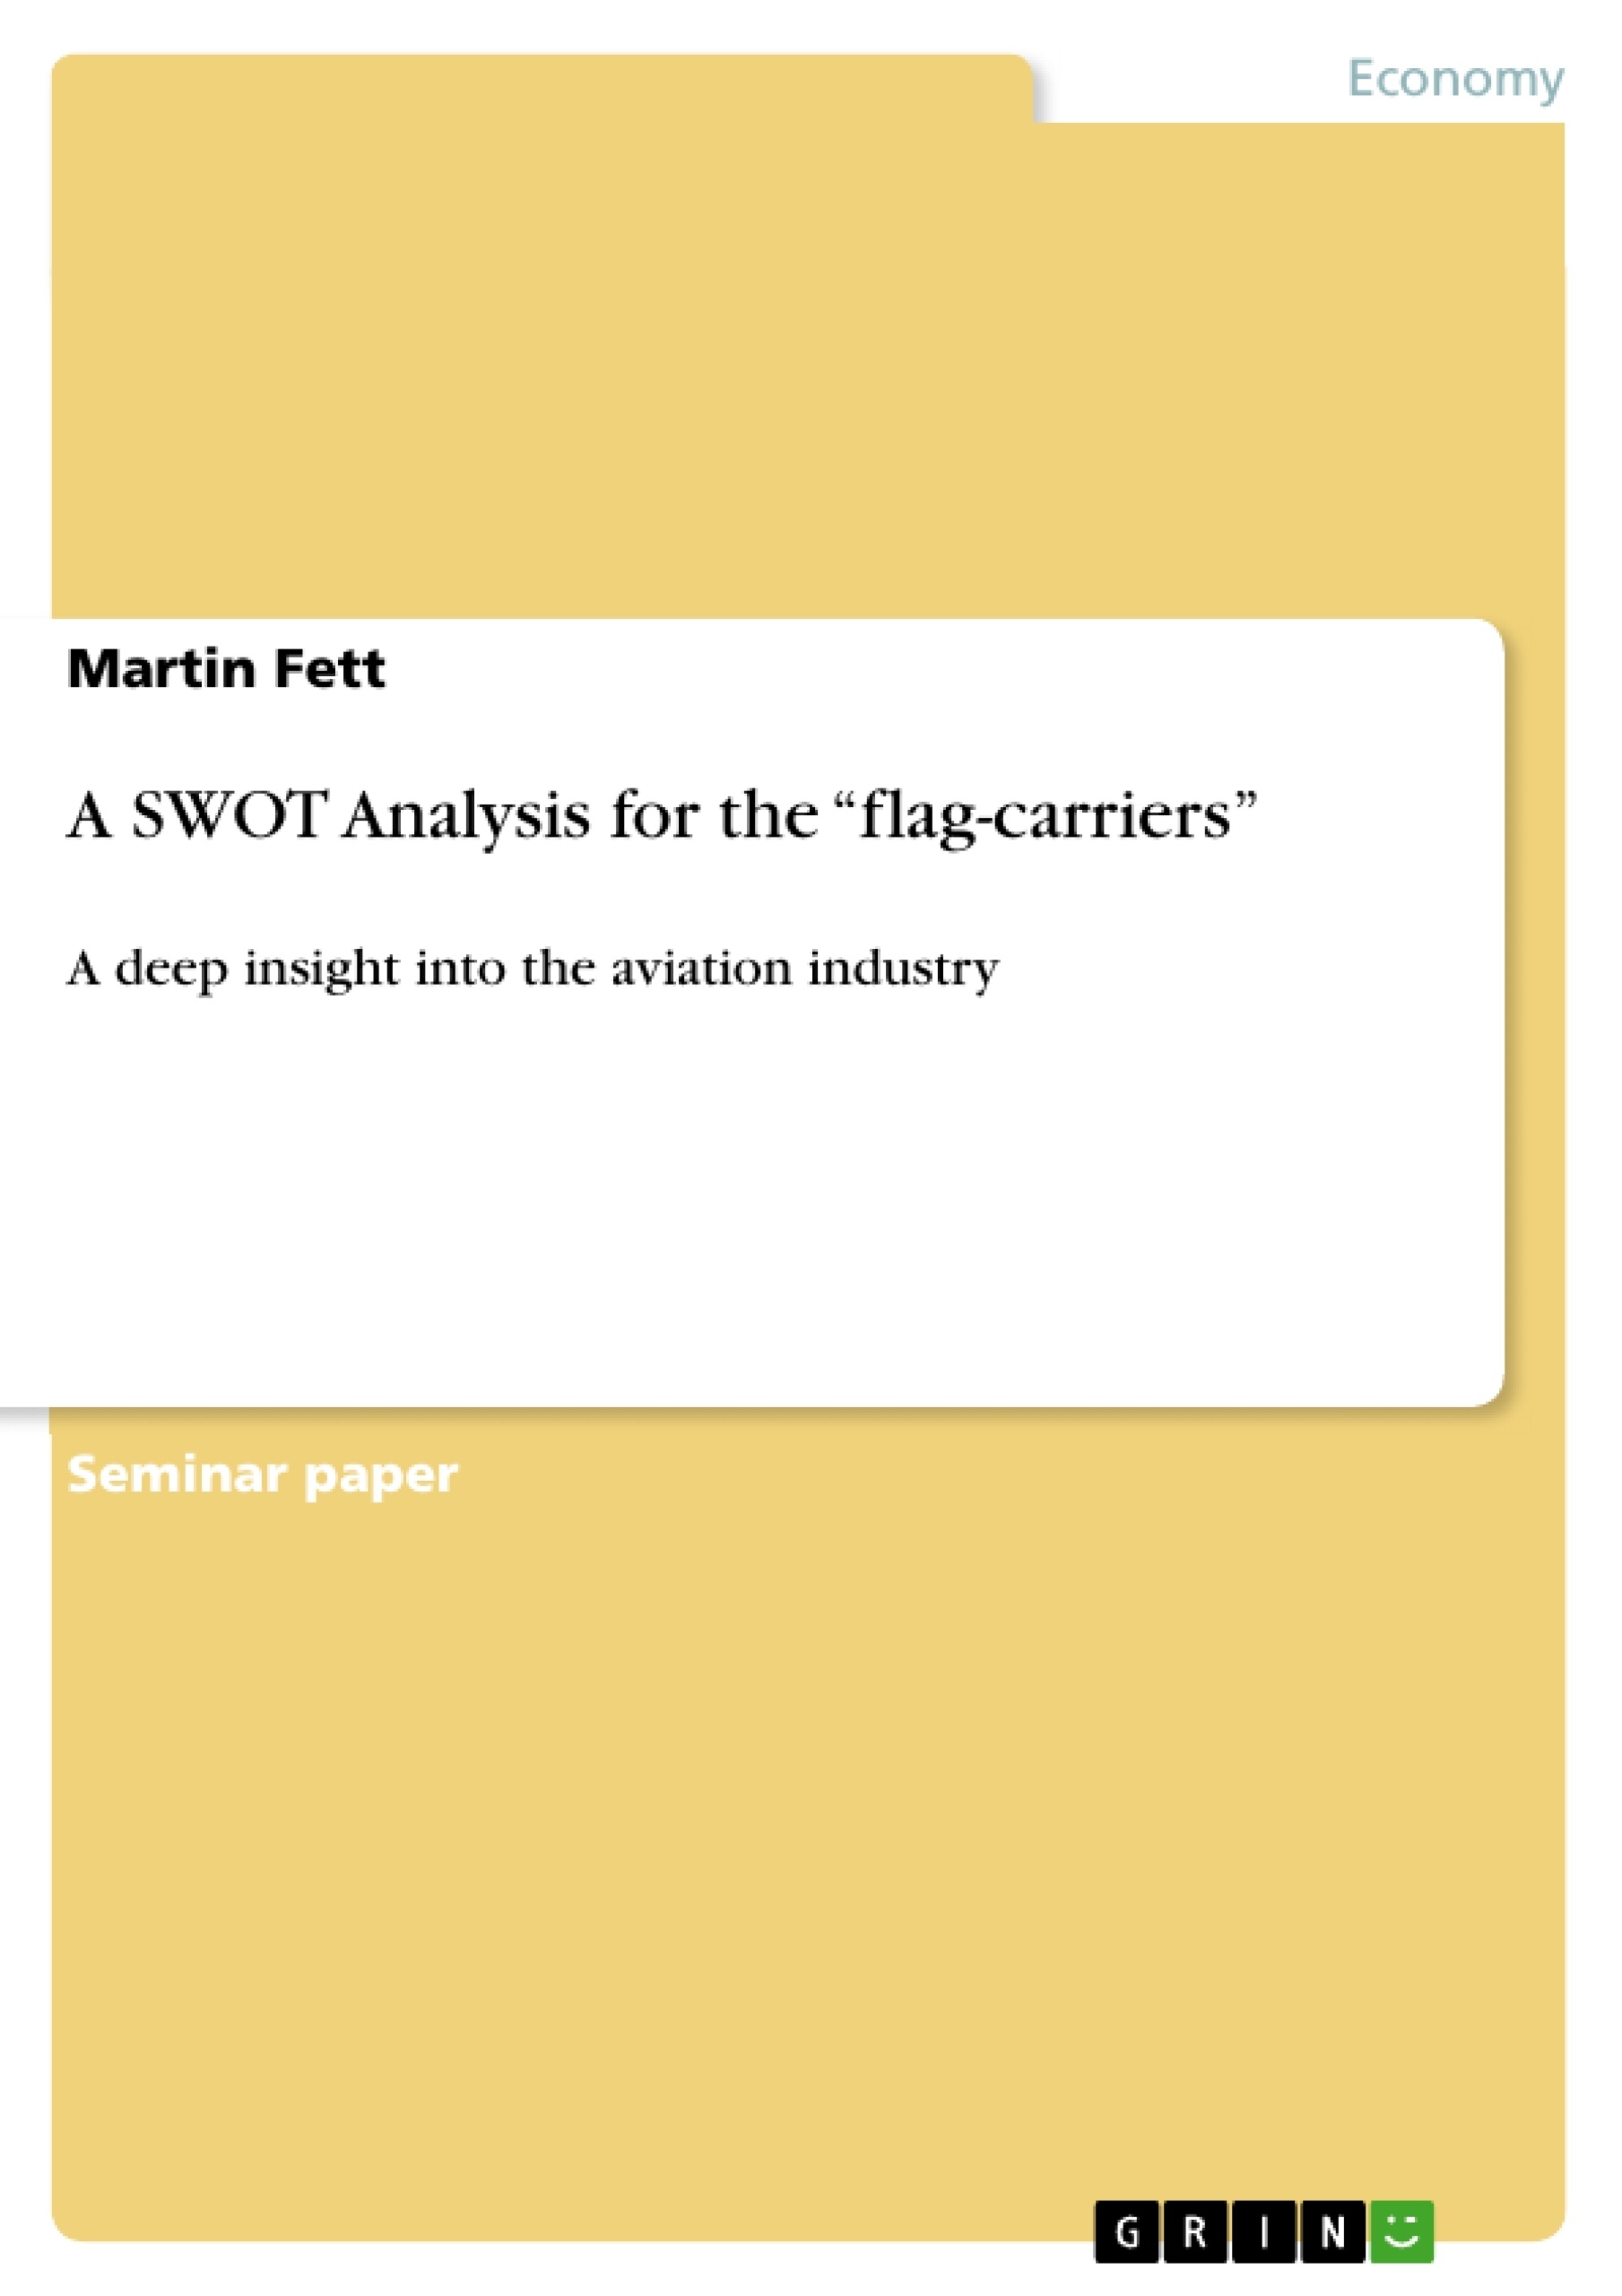 Title: A SWOT Analysis for the “flag-carriers”